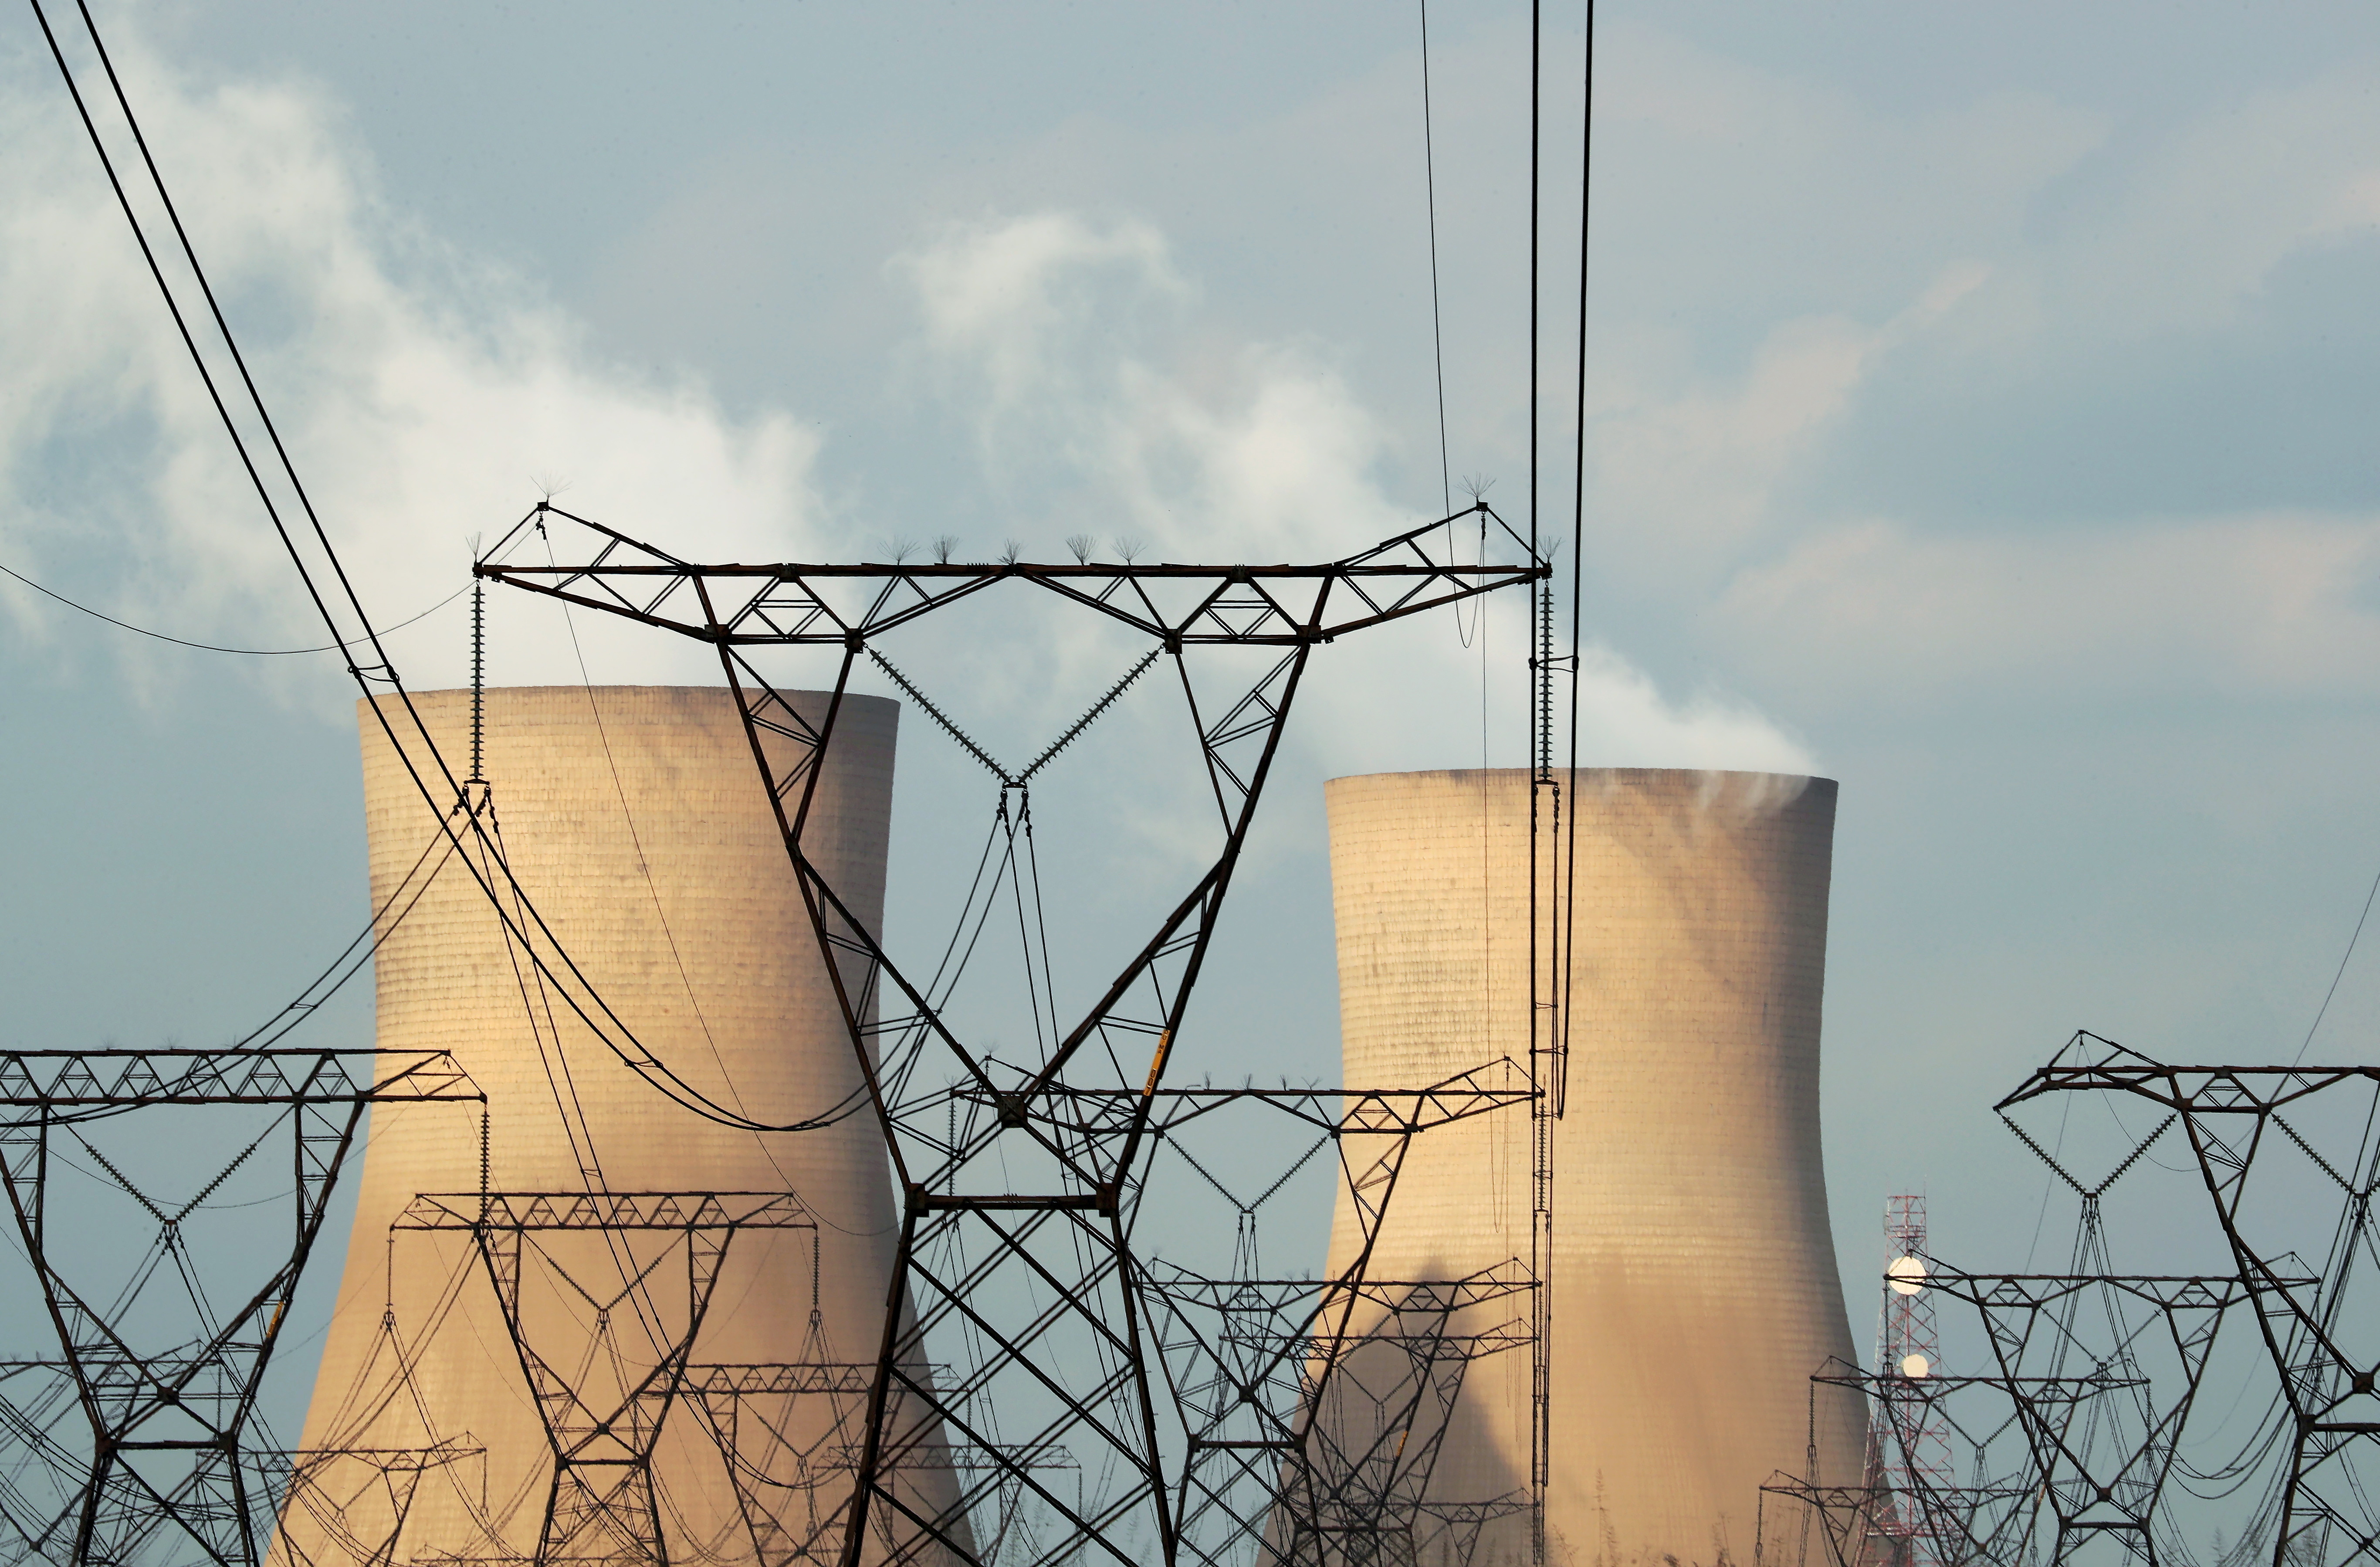 FILE PHOTO: Cooling towers are pictured at a coal-based power station owned by Eskom in Duhva